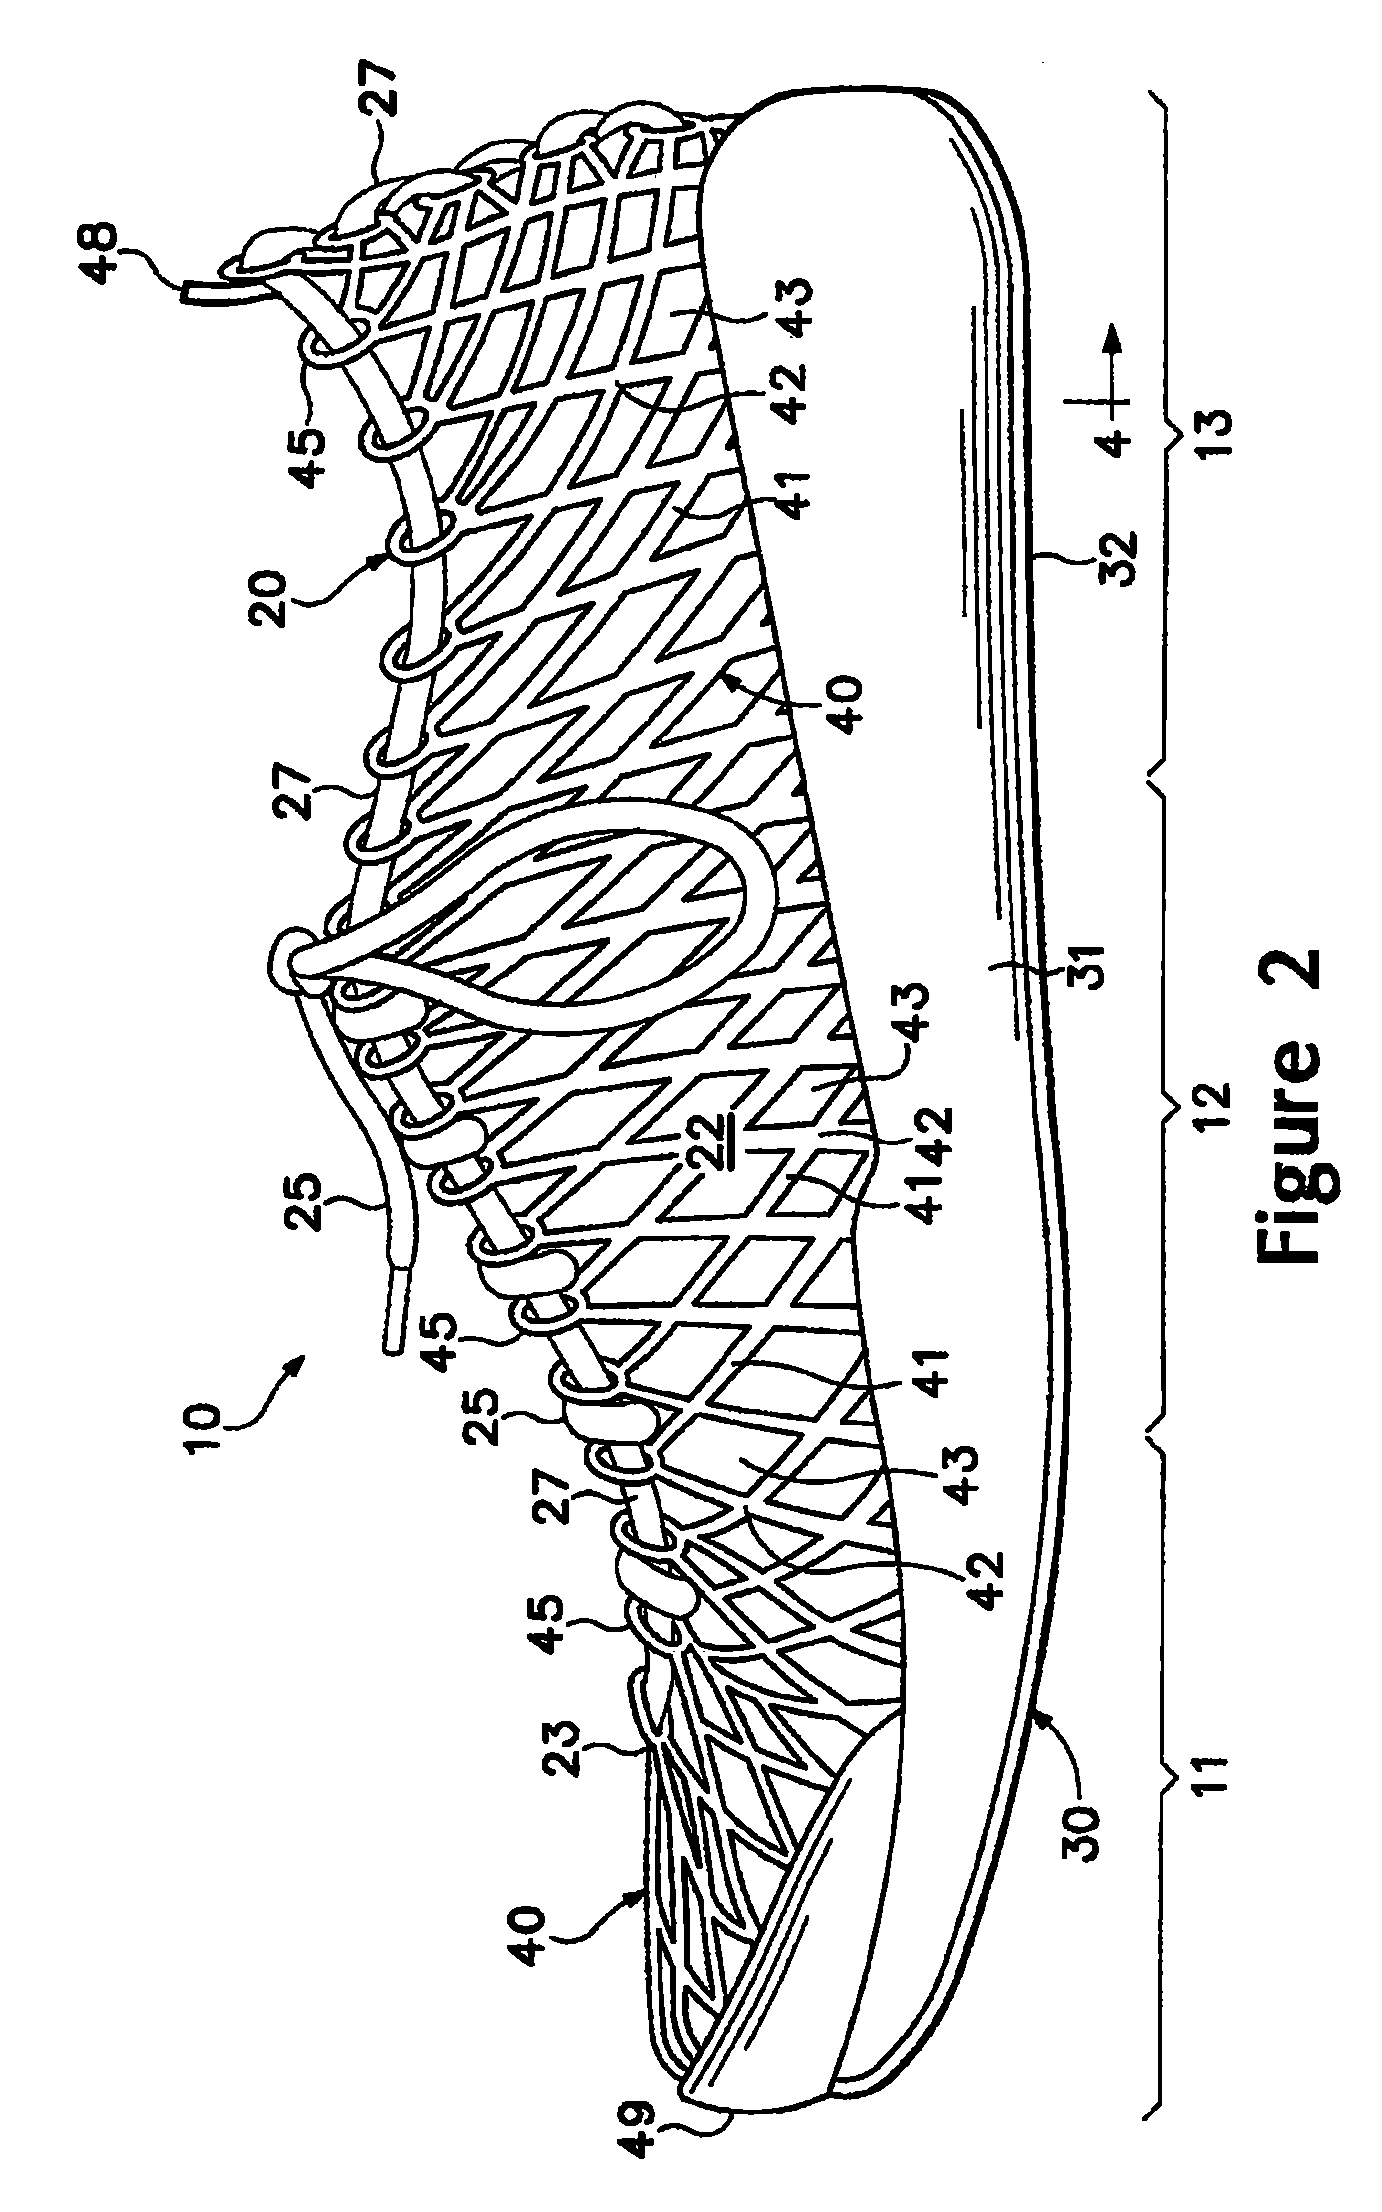 Article of footwear having an upper with a matrix layer